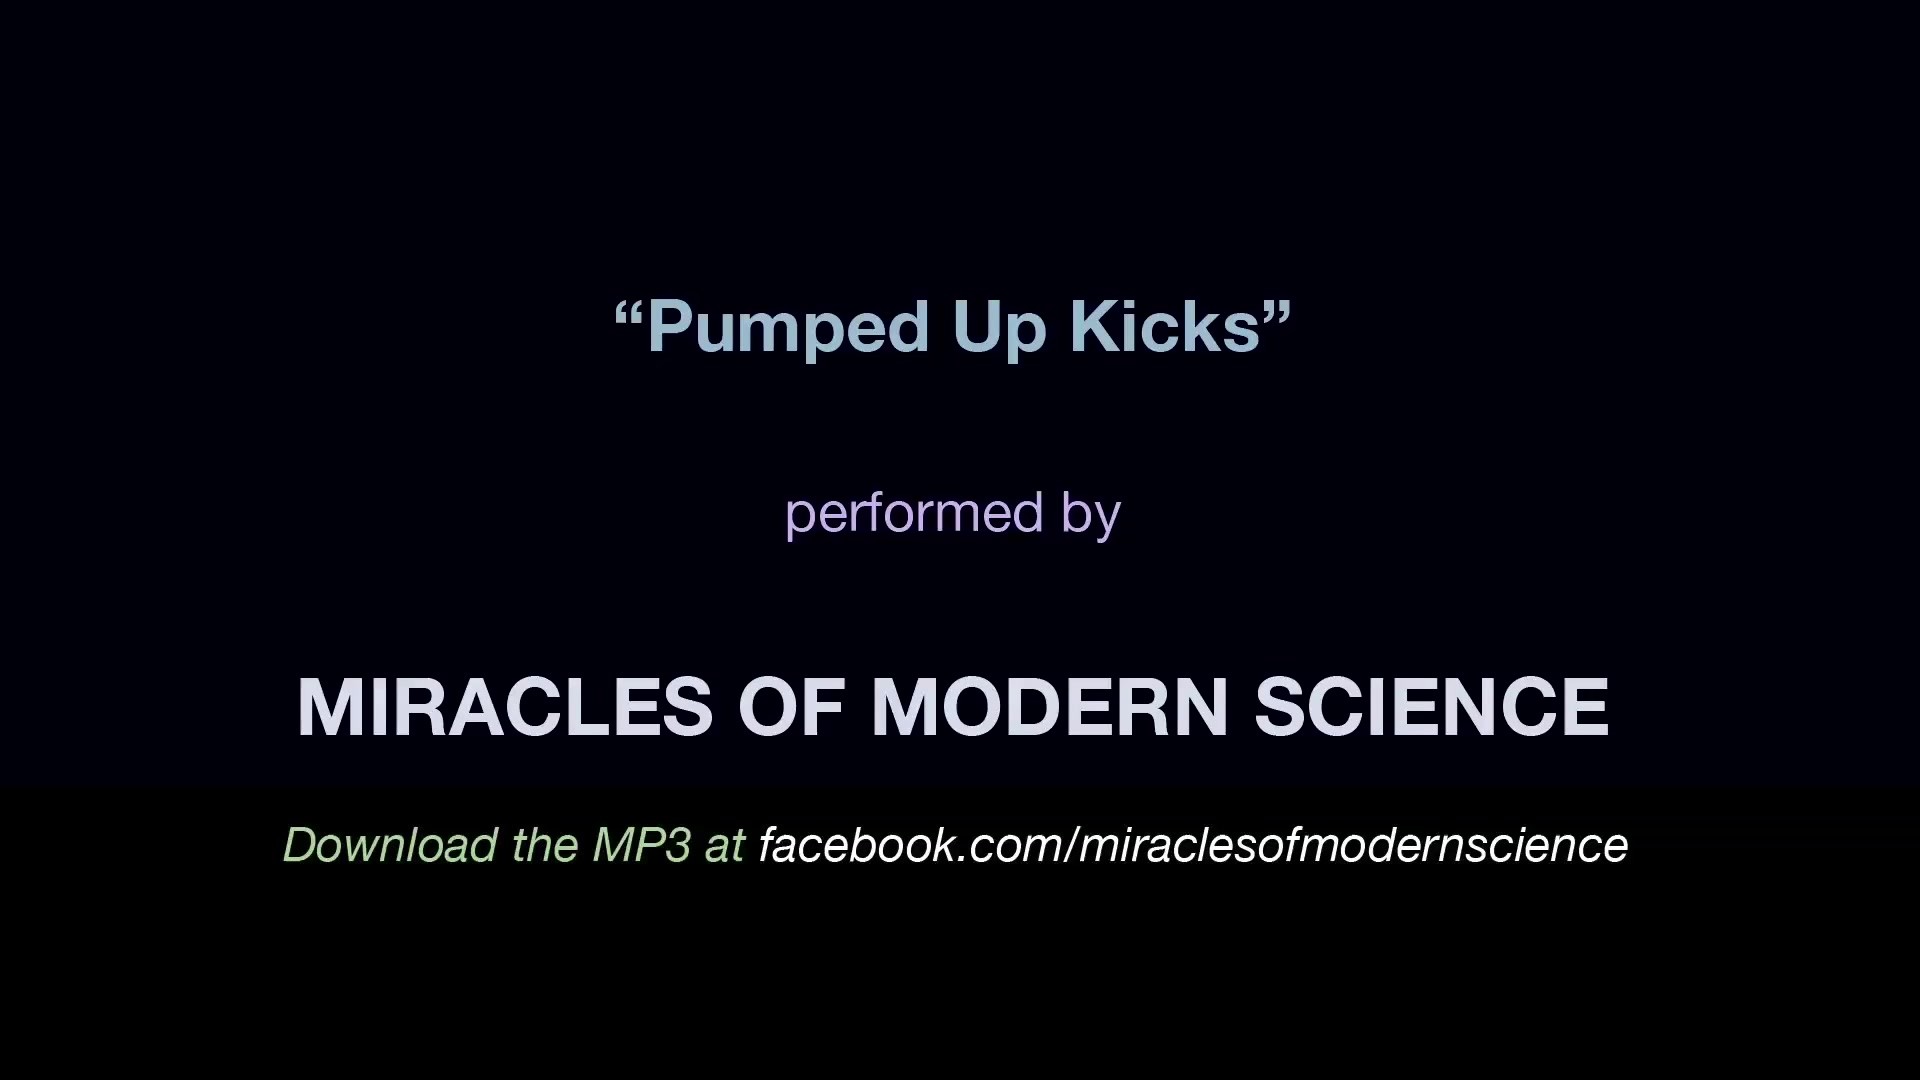 1920x1080 Foster The People Pumped Up Kicks Miracles of Modern Science cover